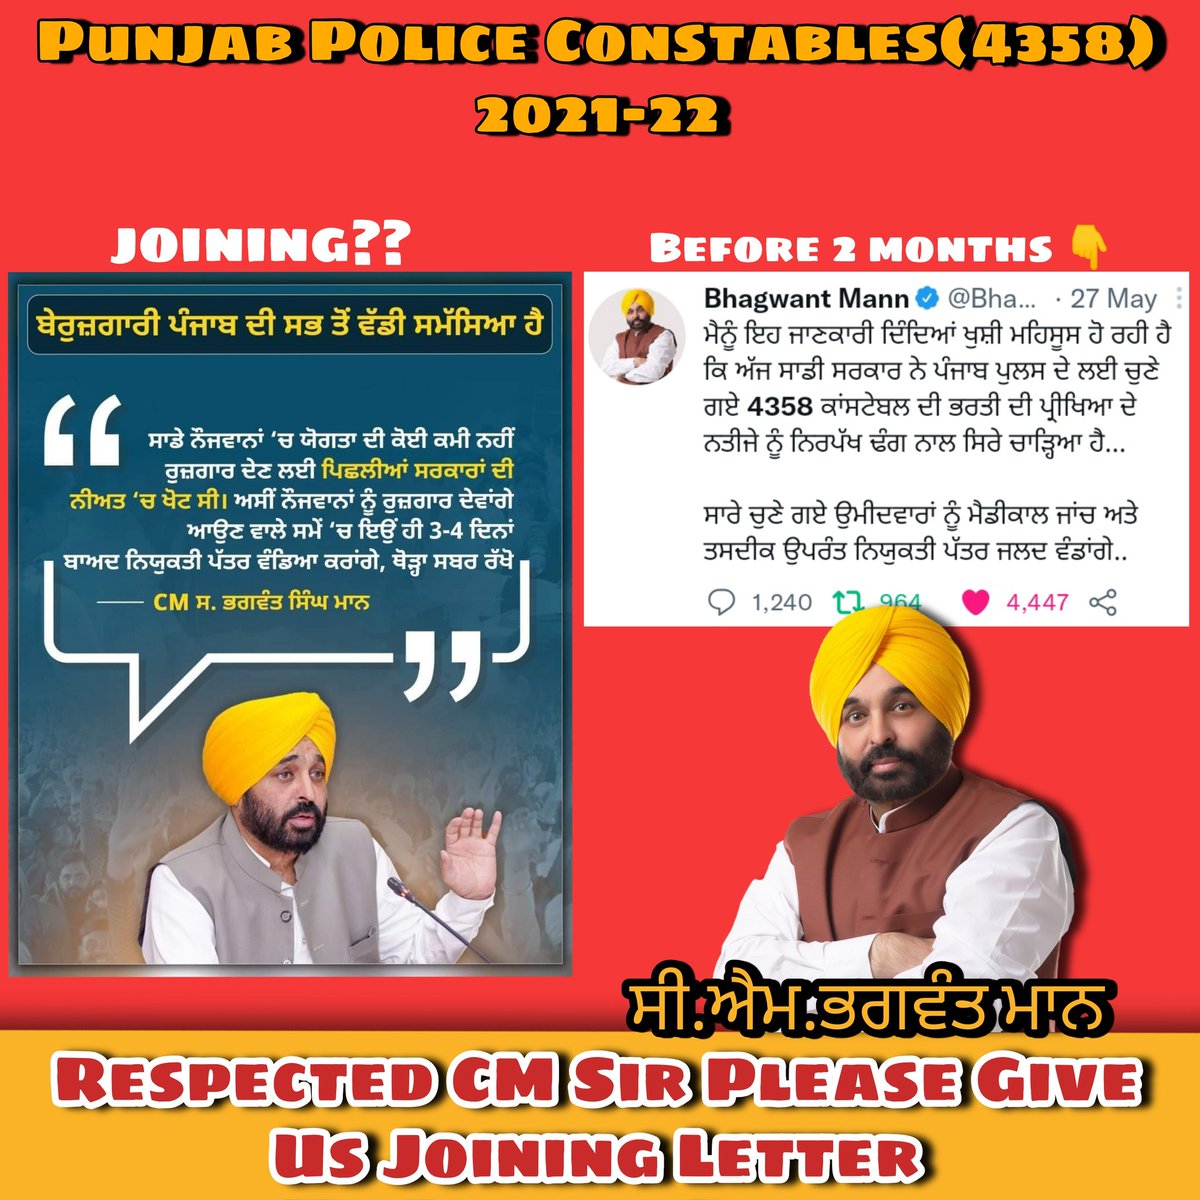 @pavittarvirk @BhagwantMann @ArvindKejriwal @HarpalCheemaMLA @raghav_chadha @AroraAmanSunam @AAPPunjab @News18Punjab Respected CM @BhagwantMann Sir as you tweeted 2 months ago about giving joining letter to newly selected constables in Punjab Police. We have been waiting for a long time for the moment when you will give us the joining letter #punjab_police_constable_joining @AAPPunjab